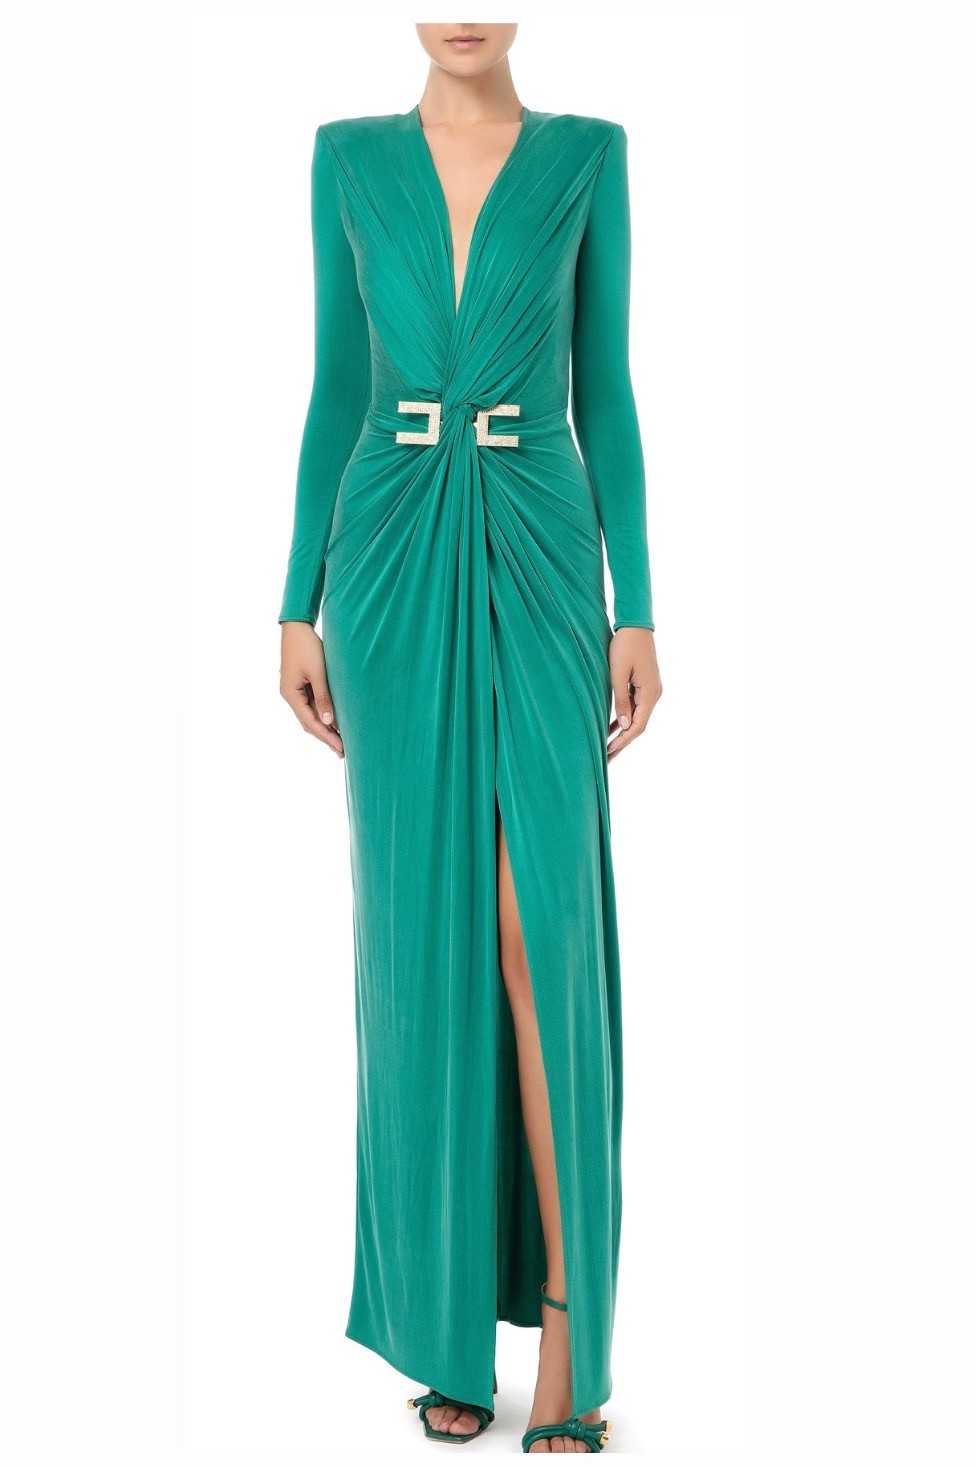 Elisabetta Franchi - RED CARPET DRESS WITH LONG SLEEVES AND RHINESTONES MAXI C - Emerald